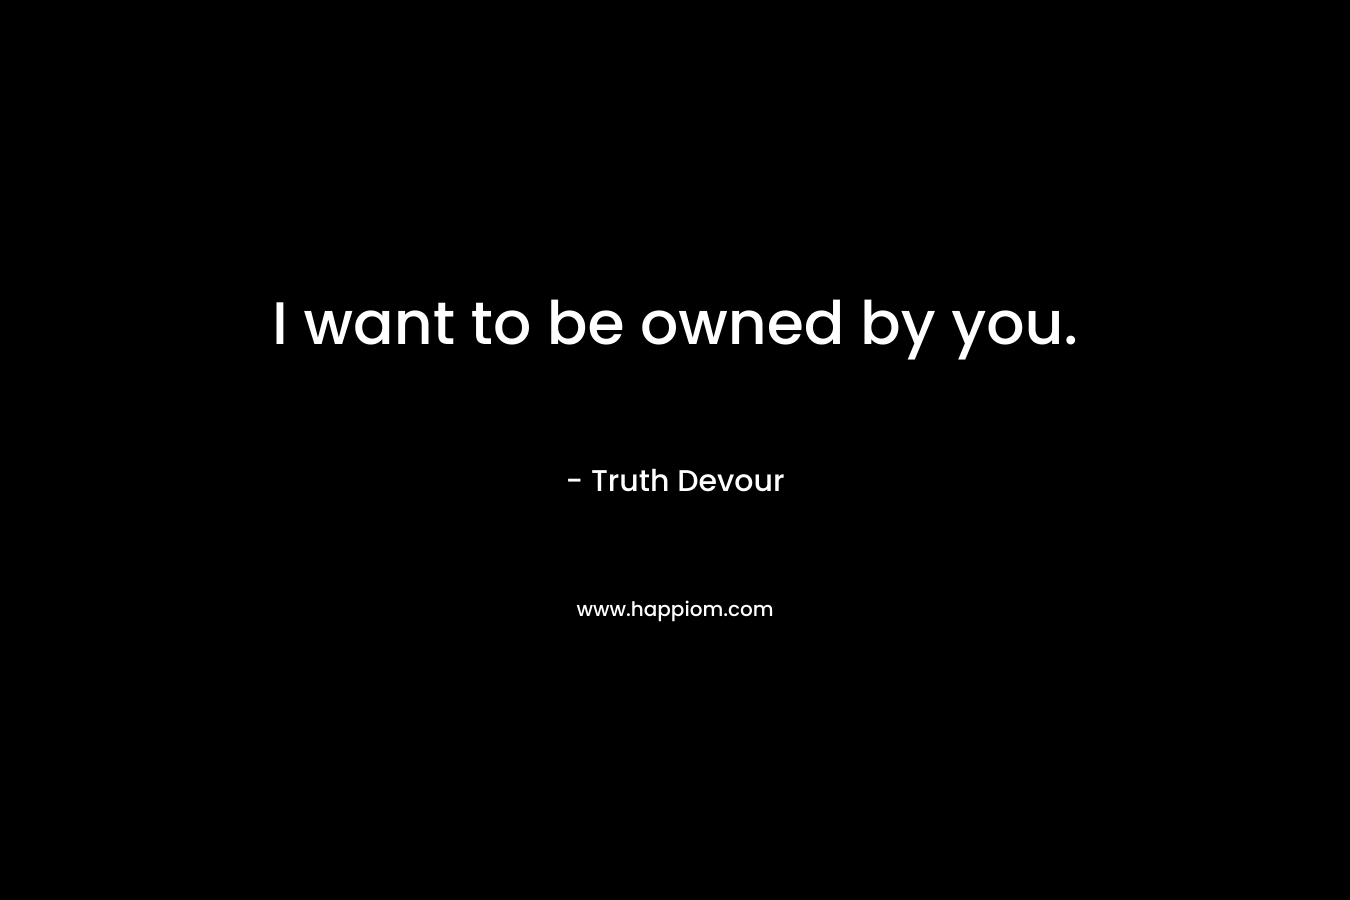 I want to be owned by you. – Truth Devour